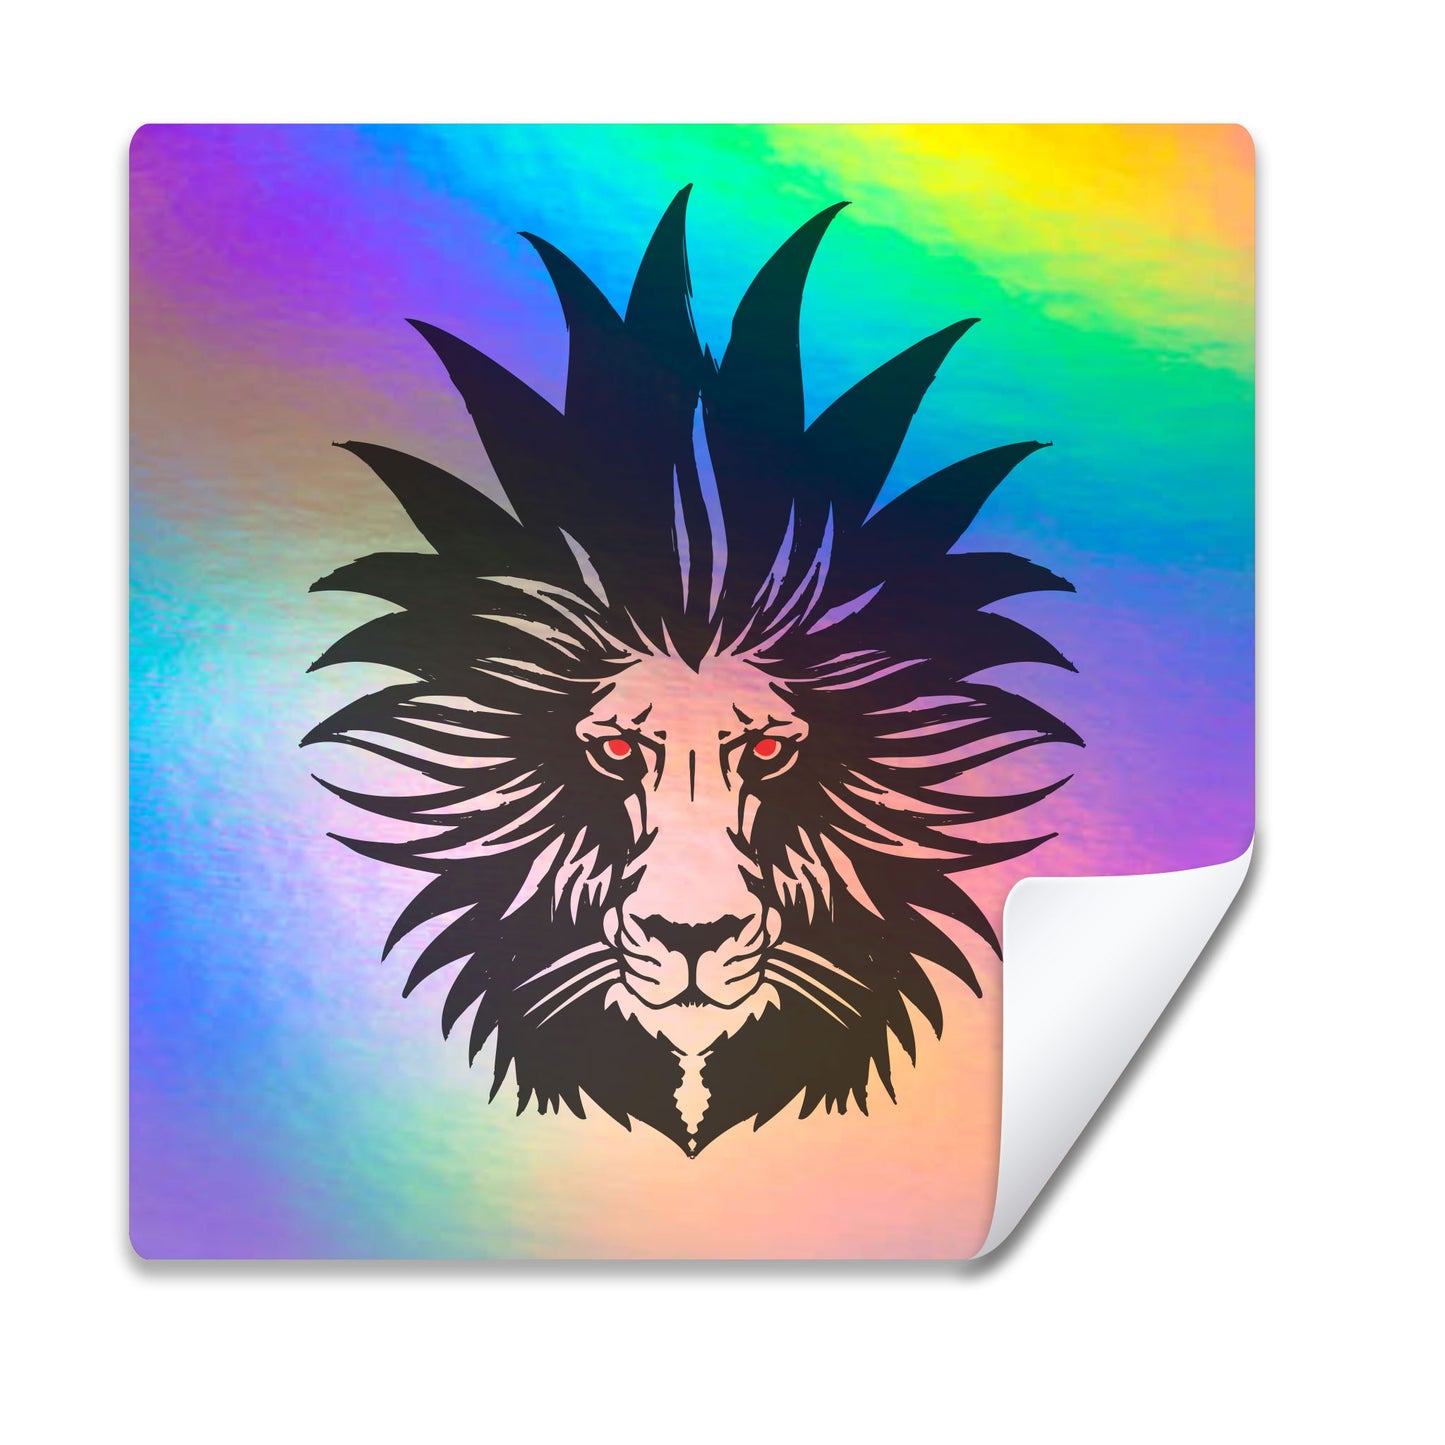 Holigraphic Square Stickers by Color Volo